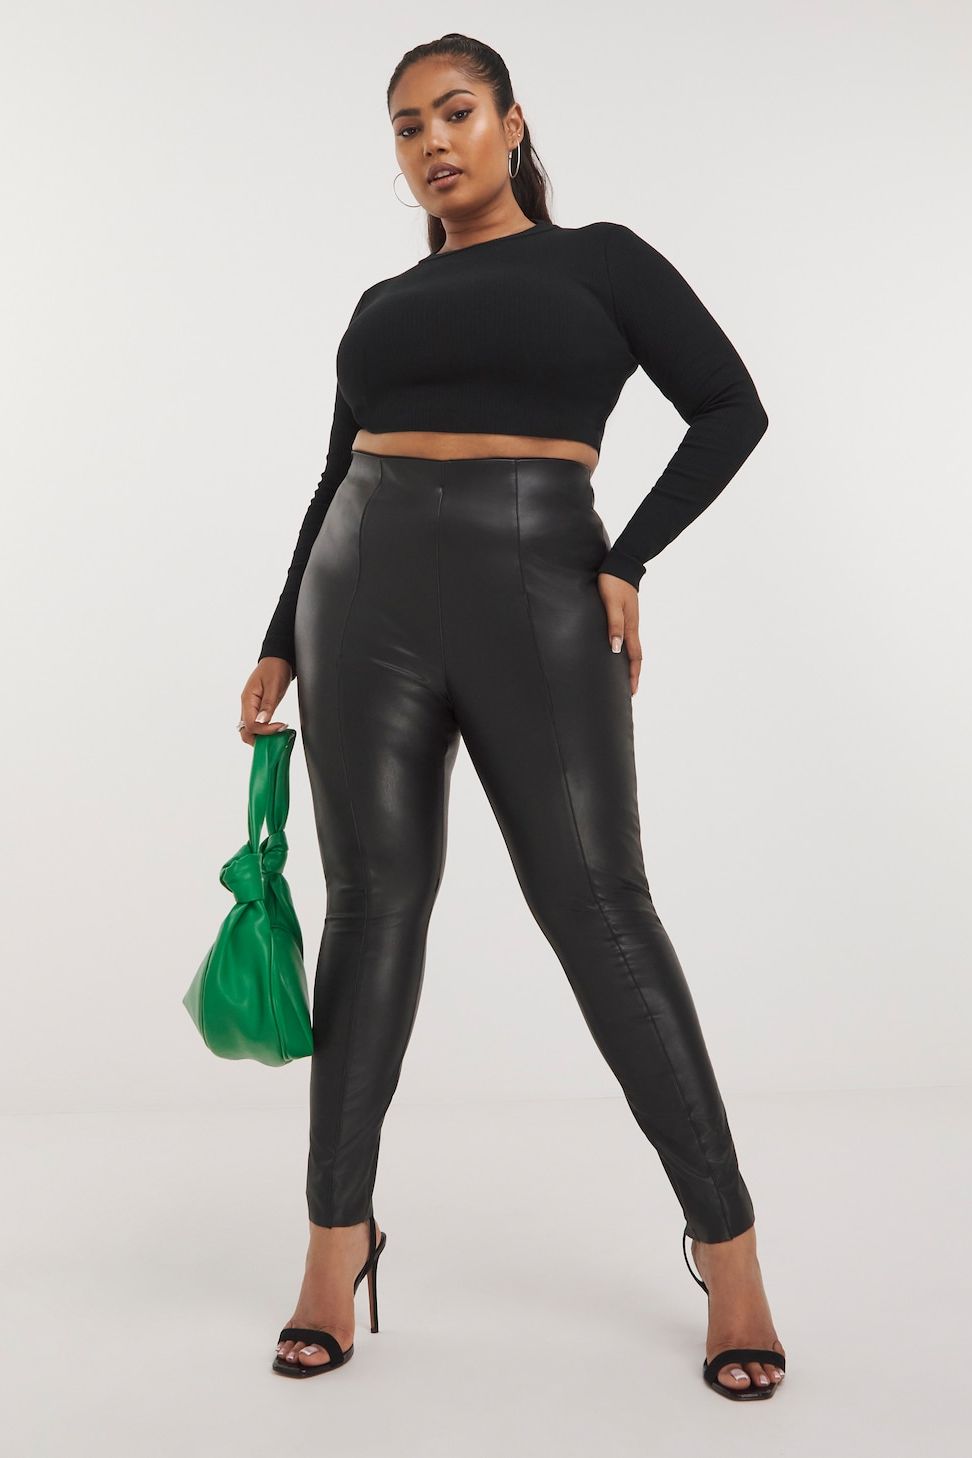 size 0 h&m faux black leather leggings, very trendy